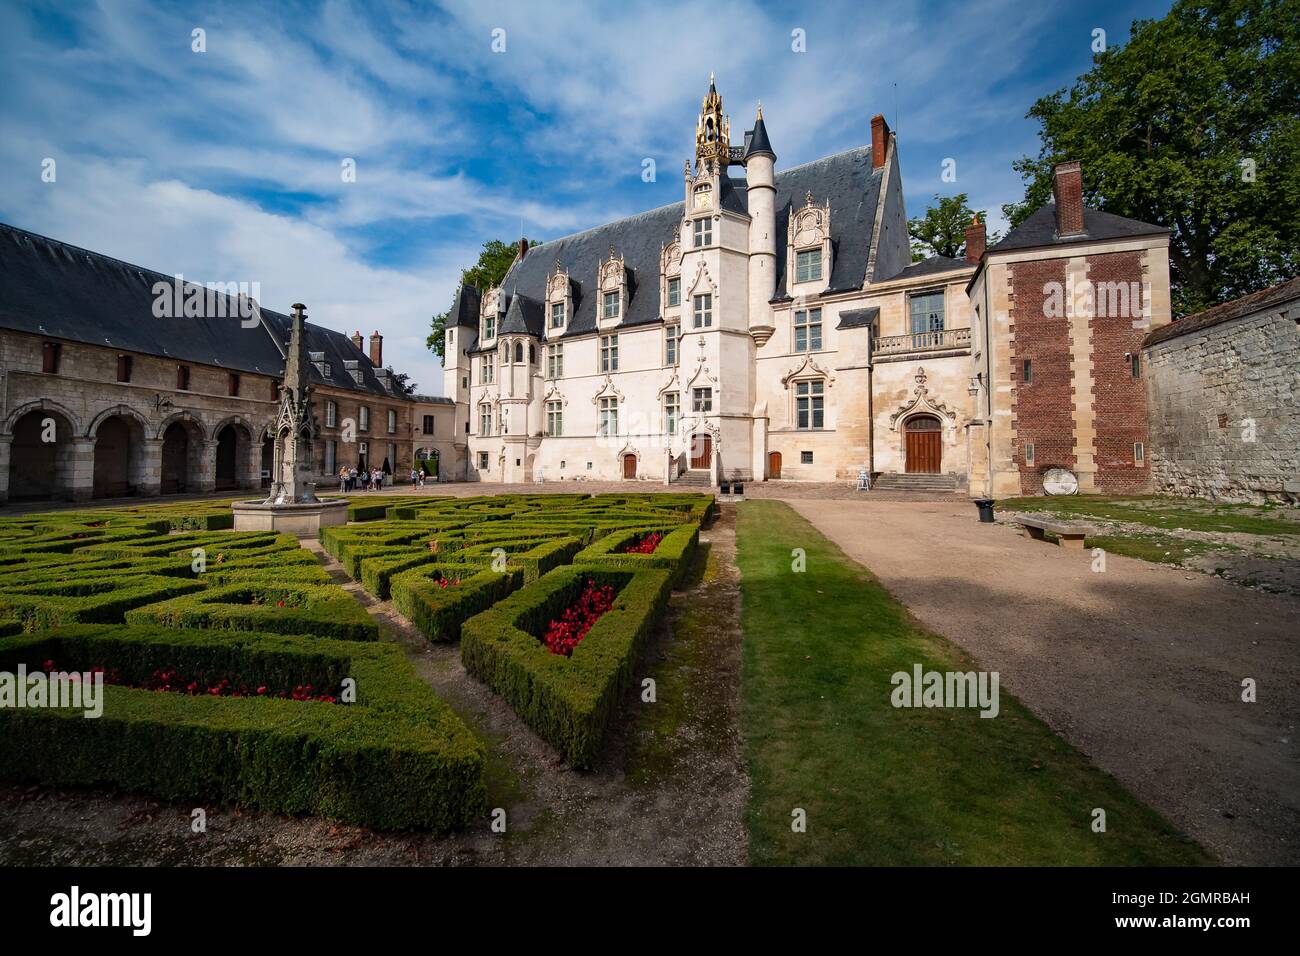 Episcopal Palace in Beauvais, OIse, France Stock Photo